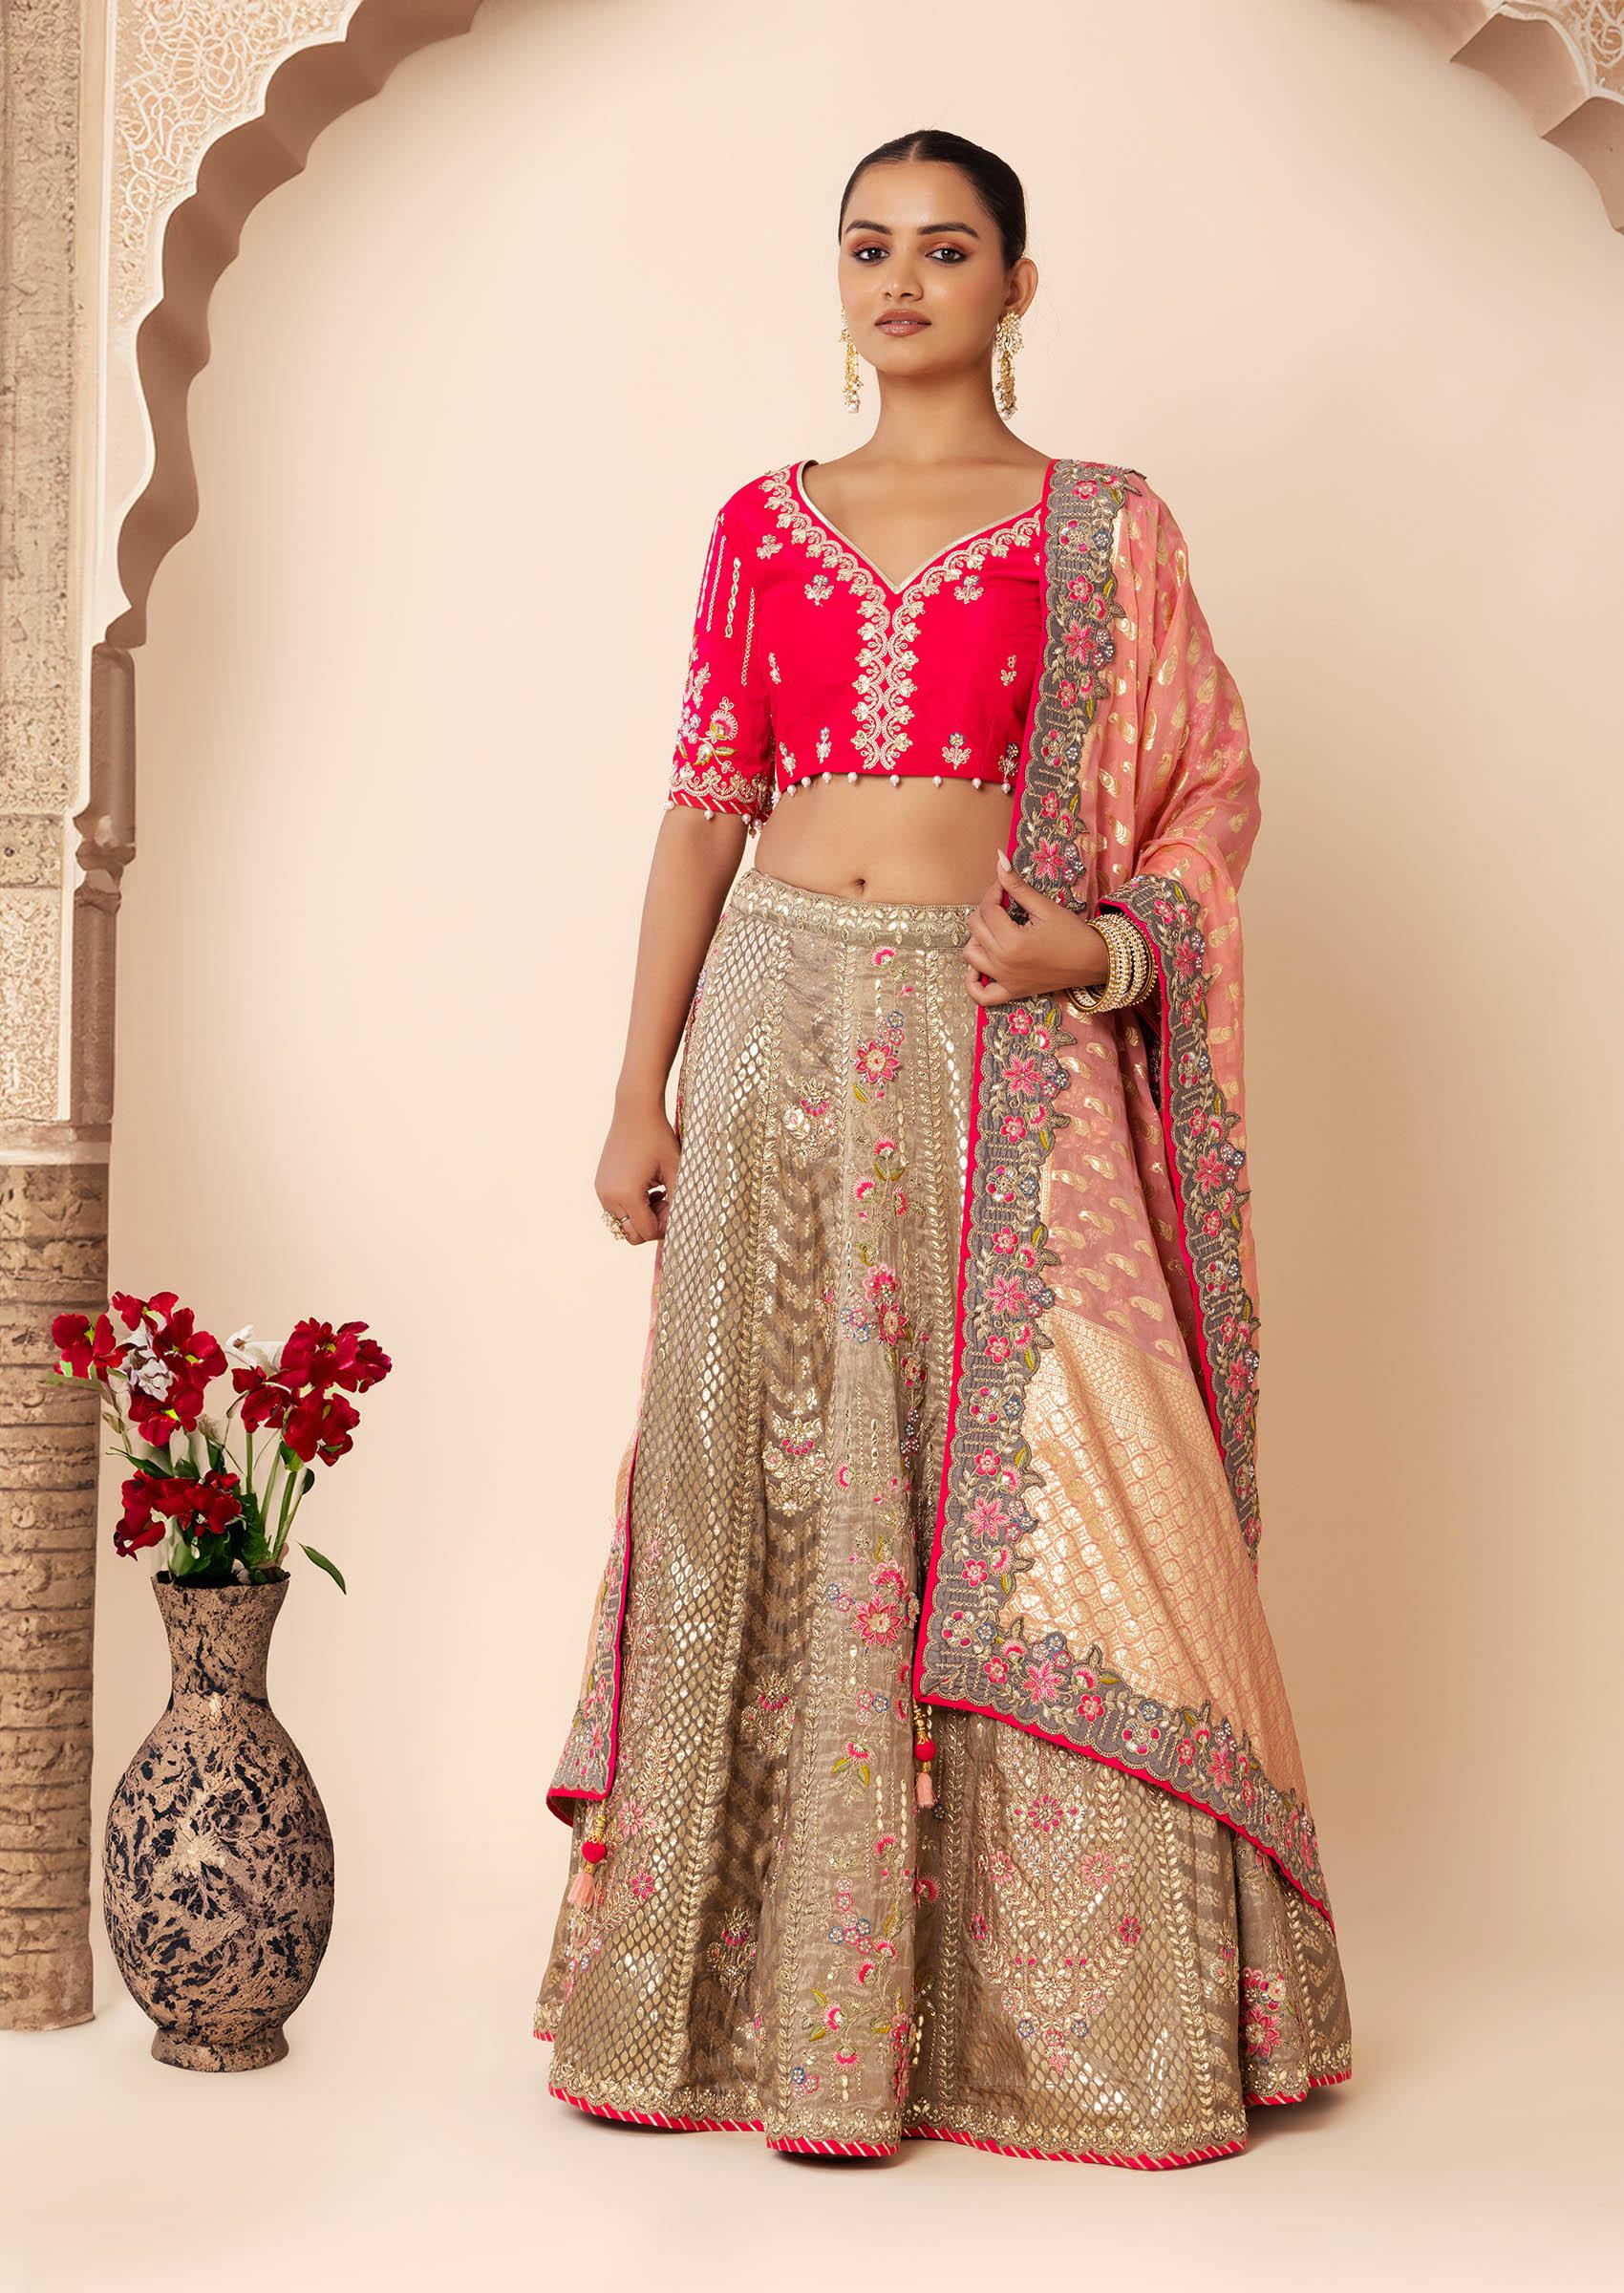 Light green brocade lehenga with a ready styled dupatta in yellow